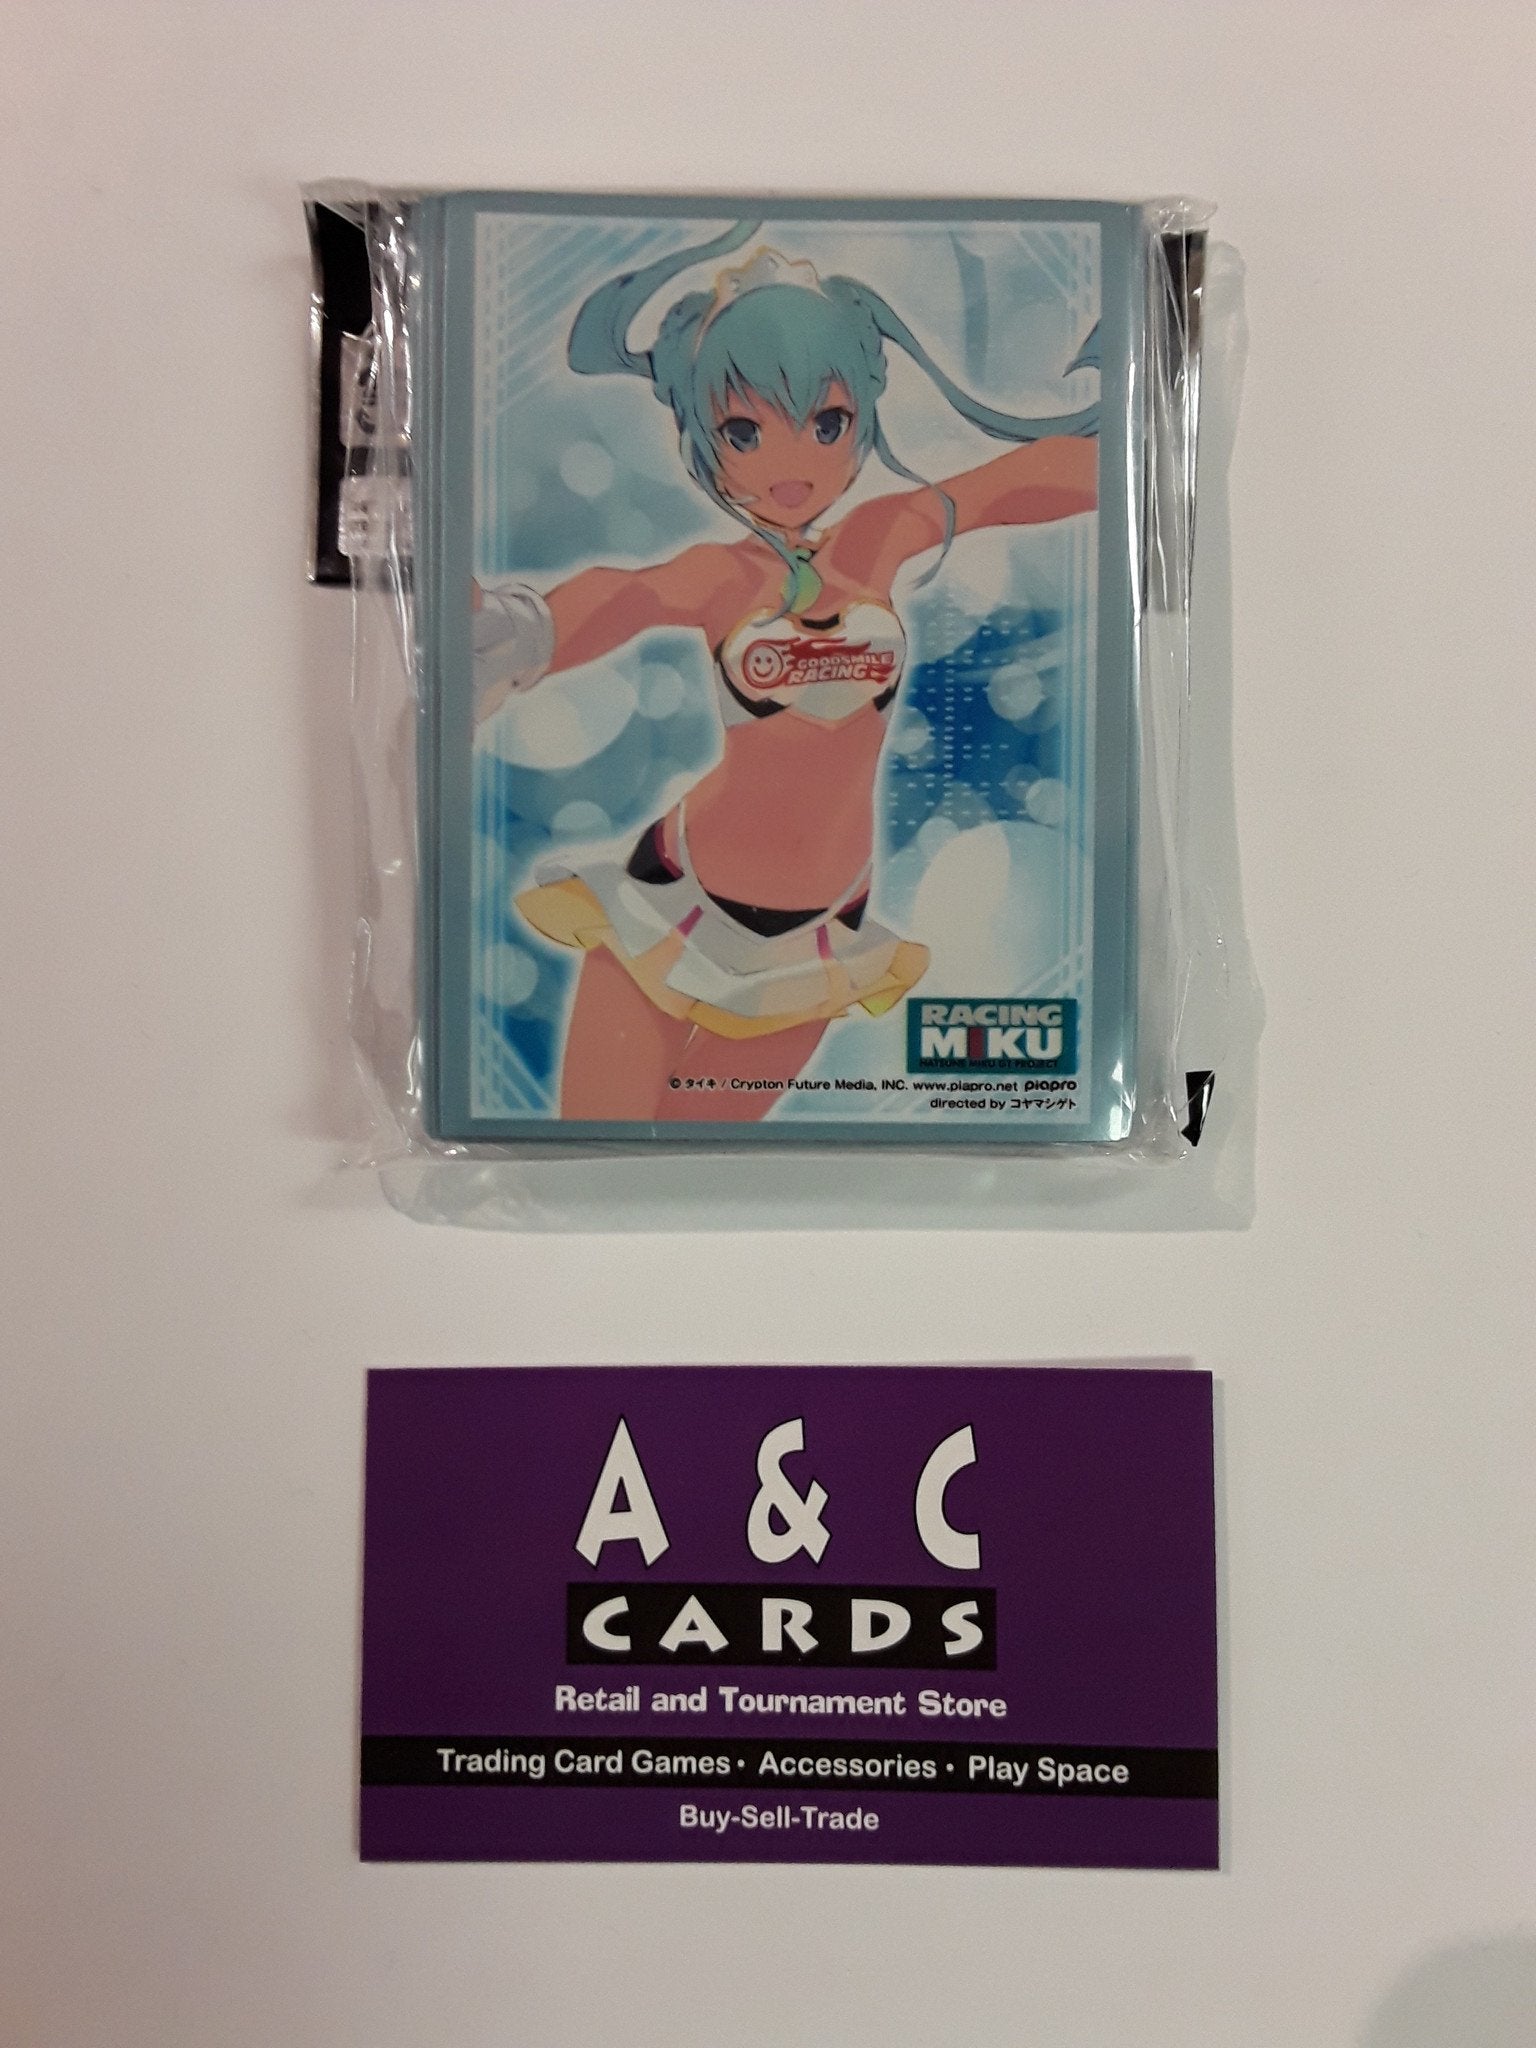 Character Sleeves "Hatsune Miku" #4 - 1 pack of Standard Size Sleeves 60pc. - Project Diva